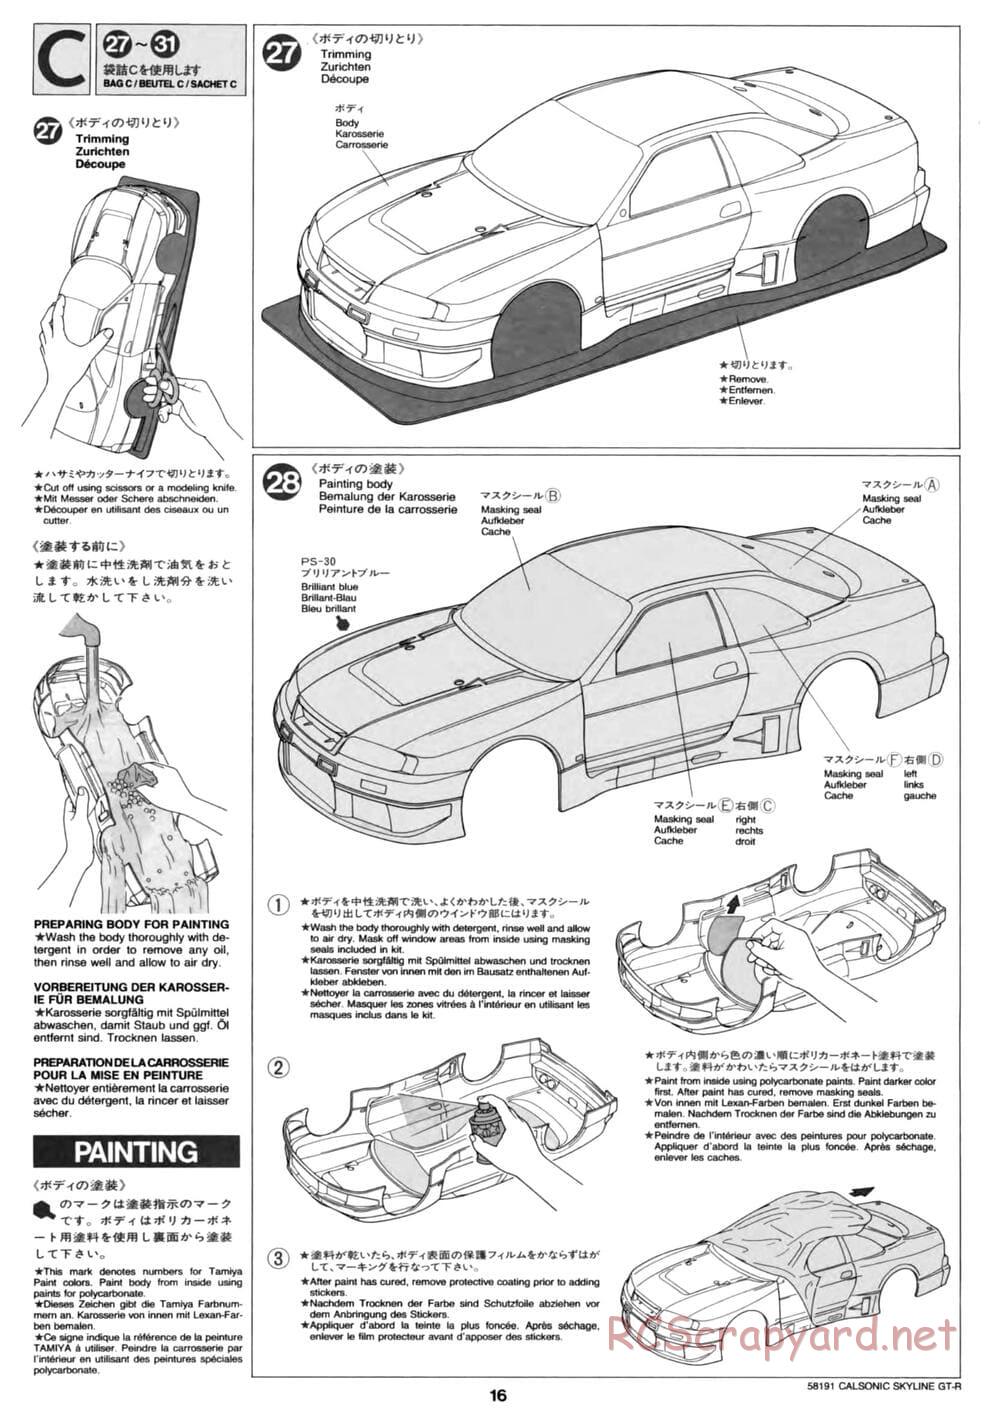 Tamiya - Calsonic Skyline GT-R - TL-01 Chassis - Manual - Page 16